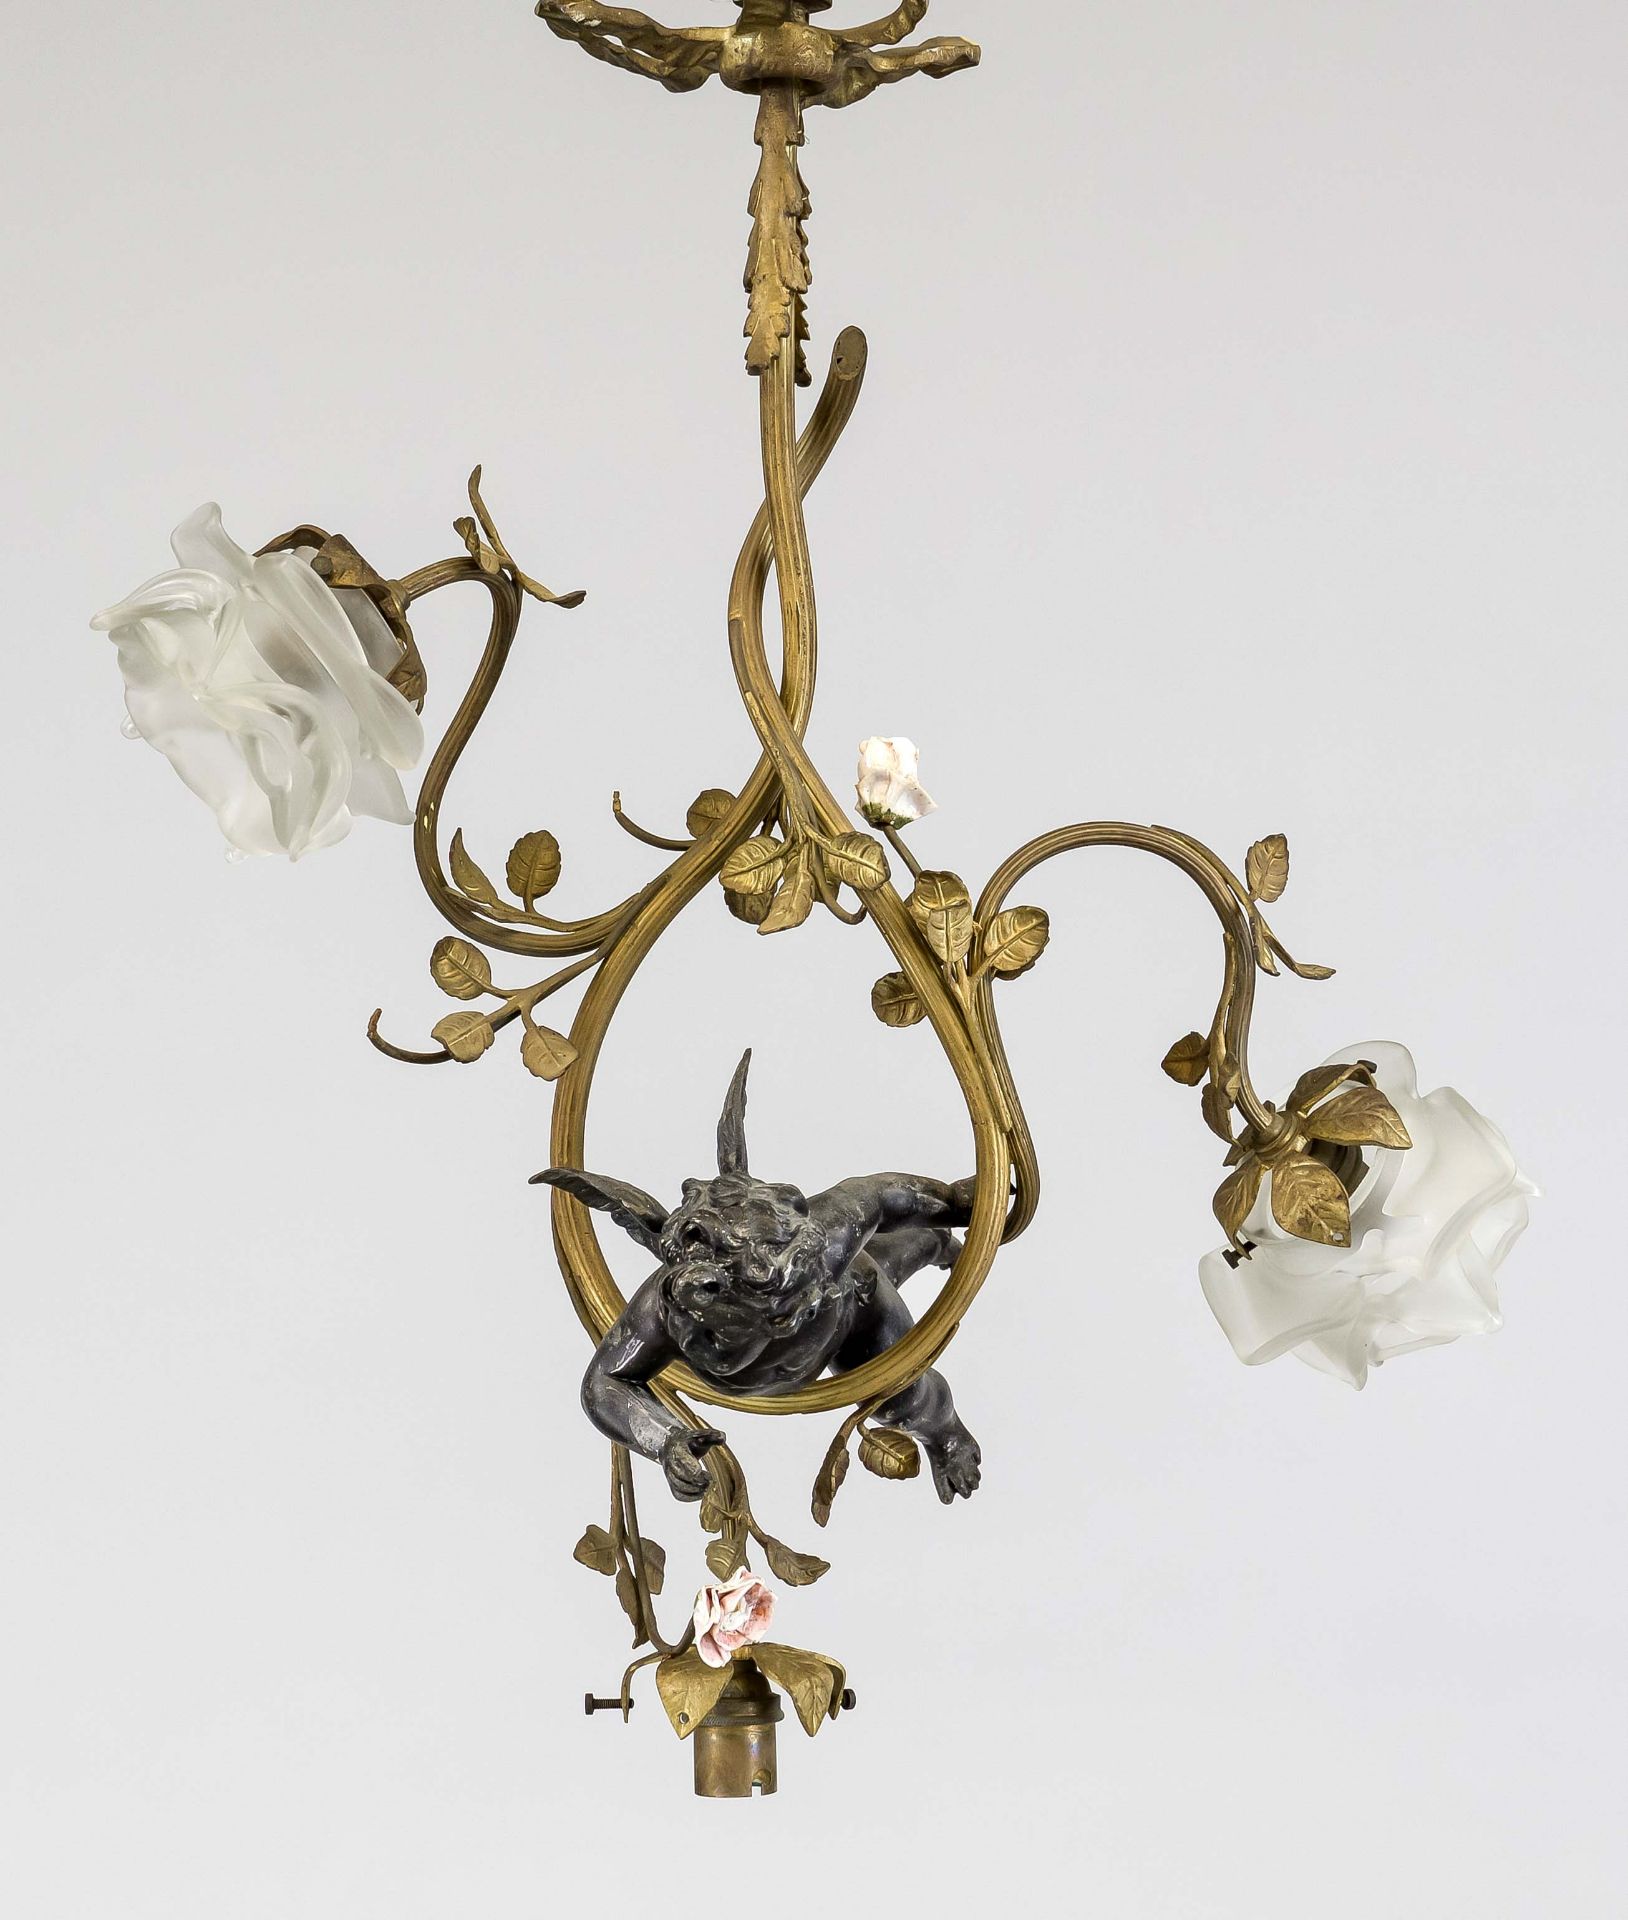 Ceiling lamp, late 19th century, floating putto surrounded by shrubs and leaves, 2 of 3 sockets with